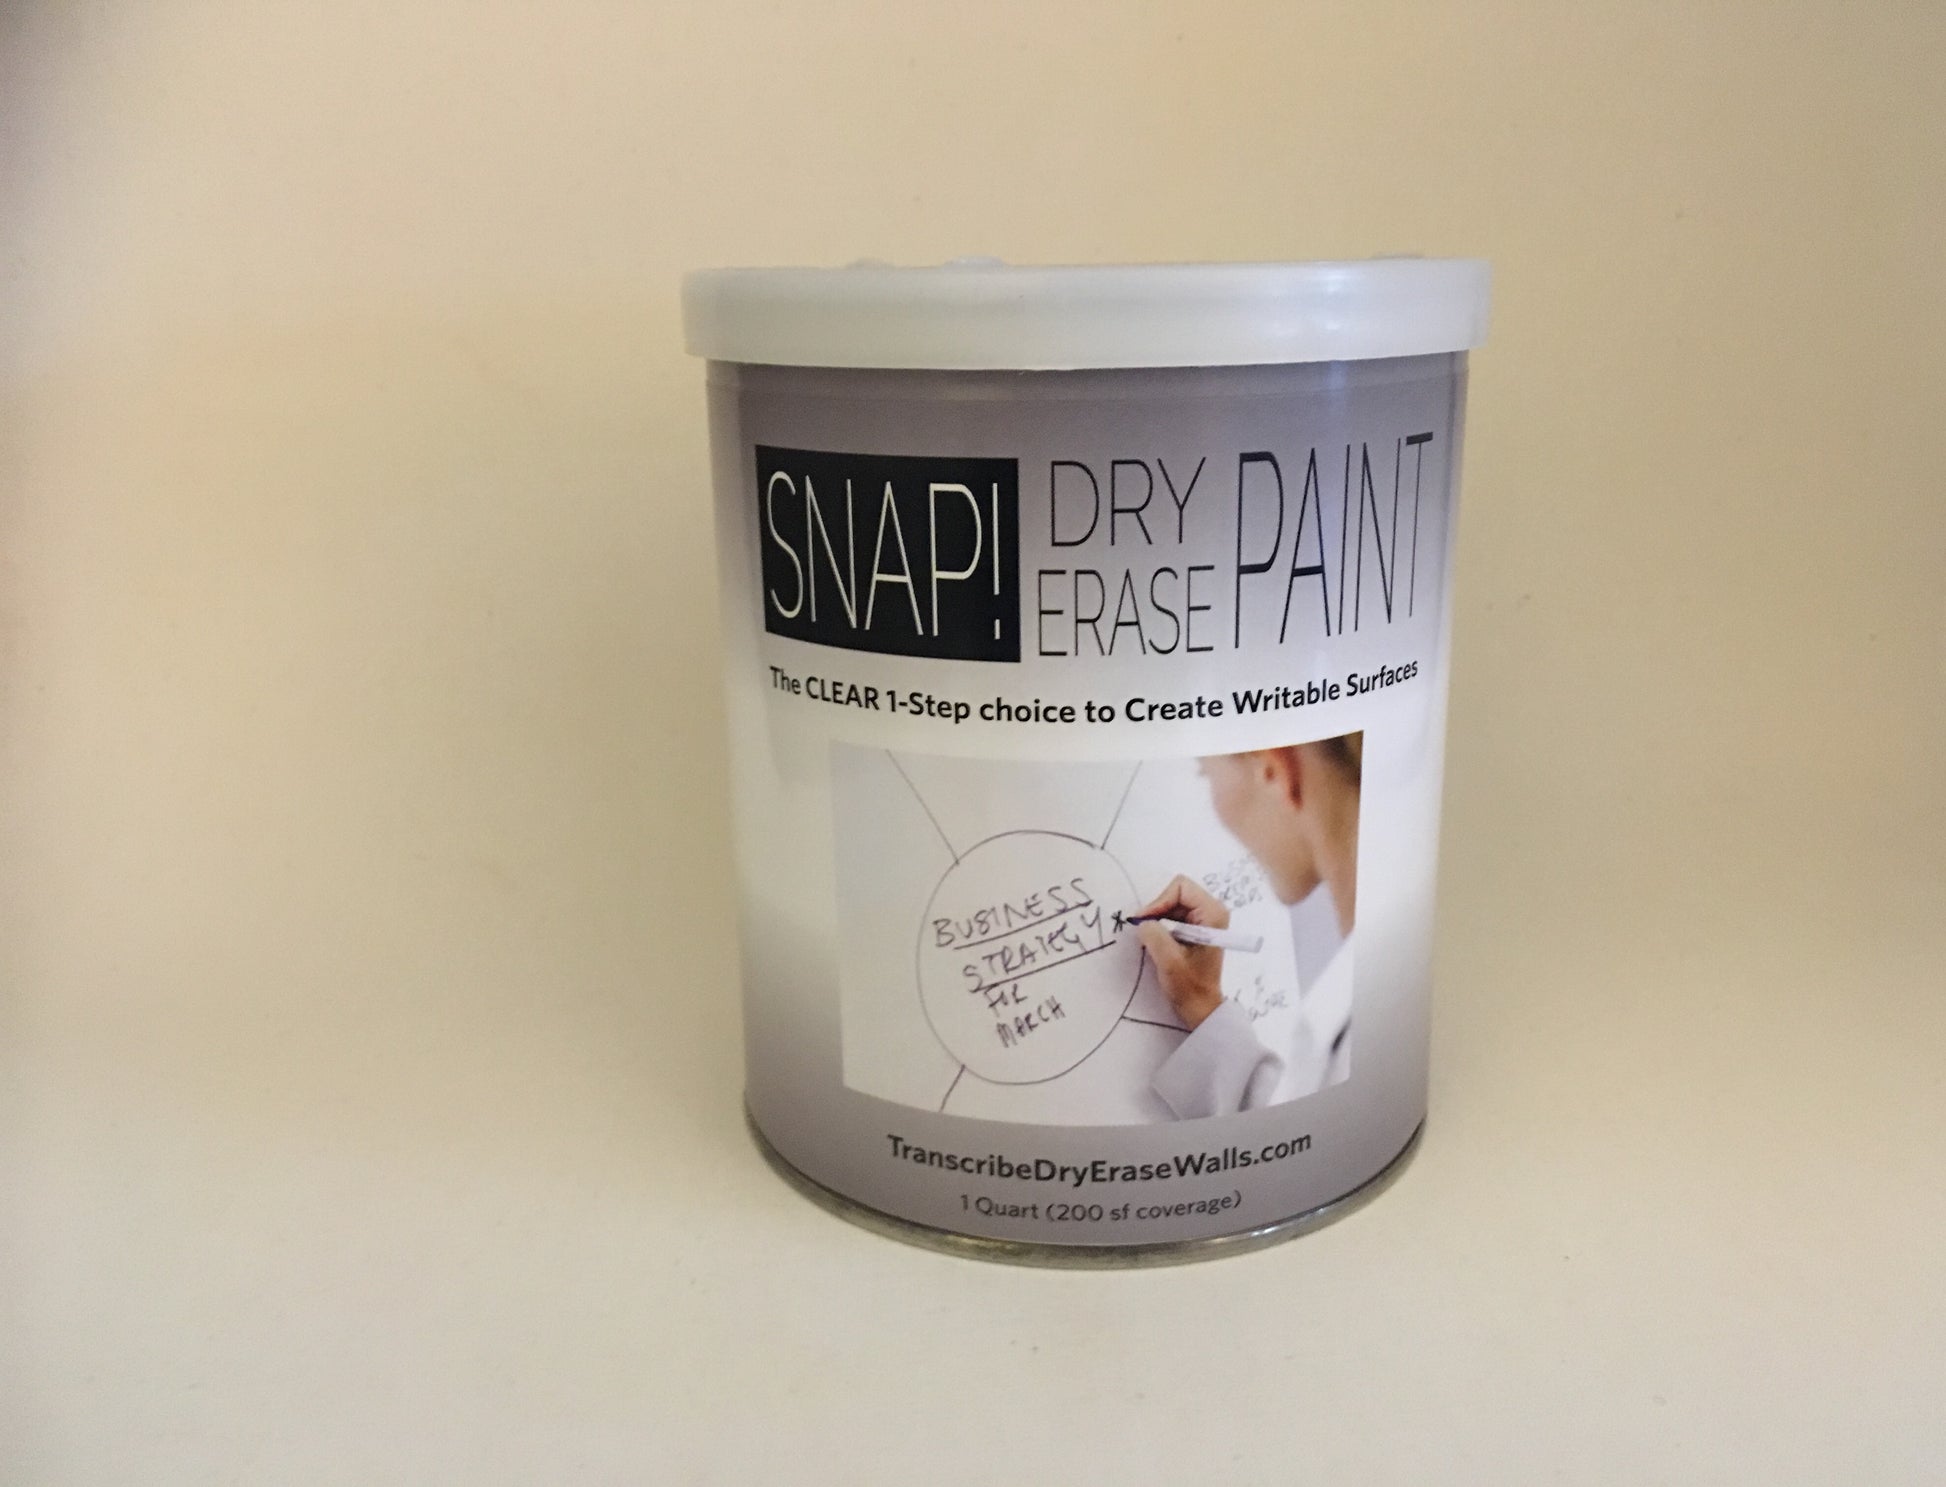 SNAP! Dry Erase Paint – Specified Solutions